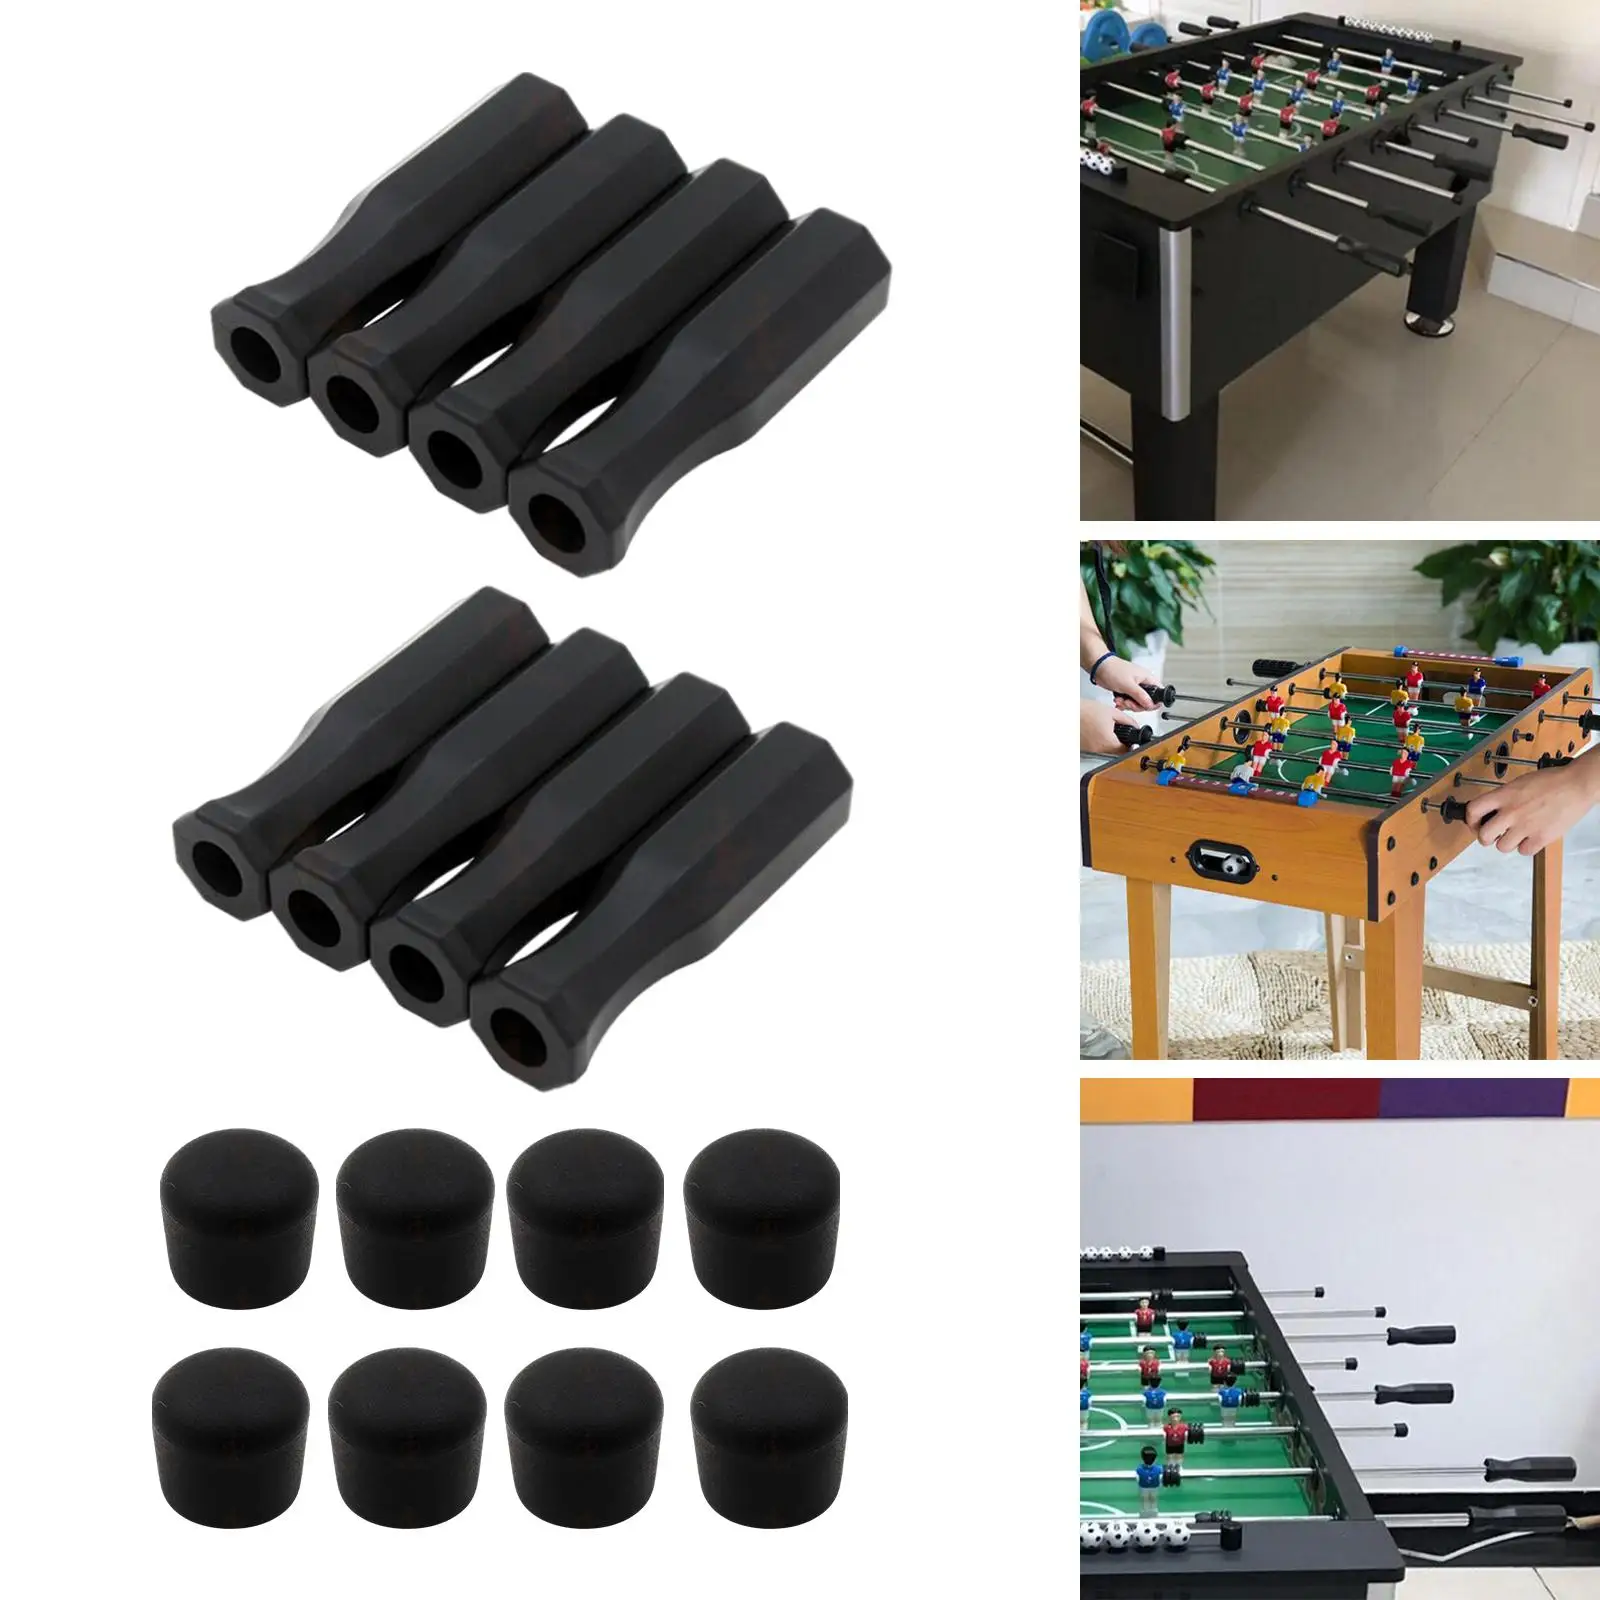 Pack of 16 Octagonal Handles and Safety End Caps Non-Slip Design Part , Black Foosball Rods Grips for Standard Foosball Tables